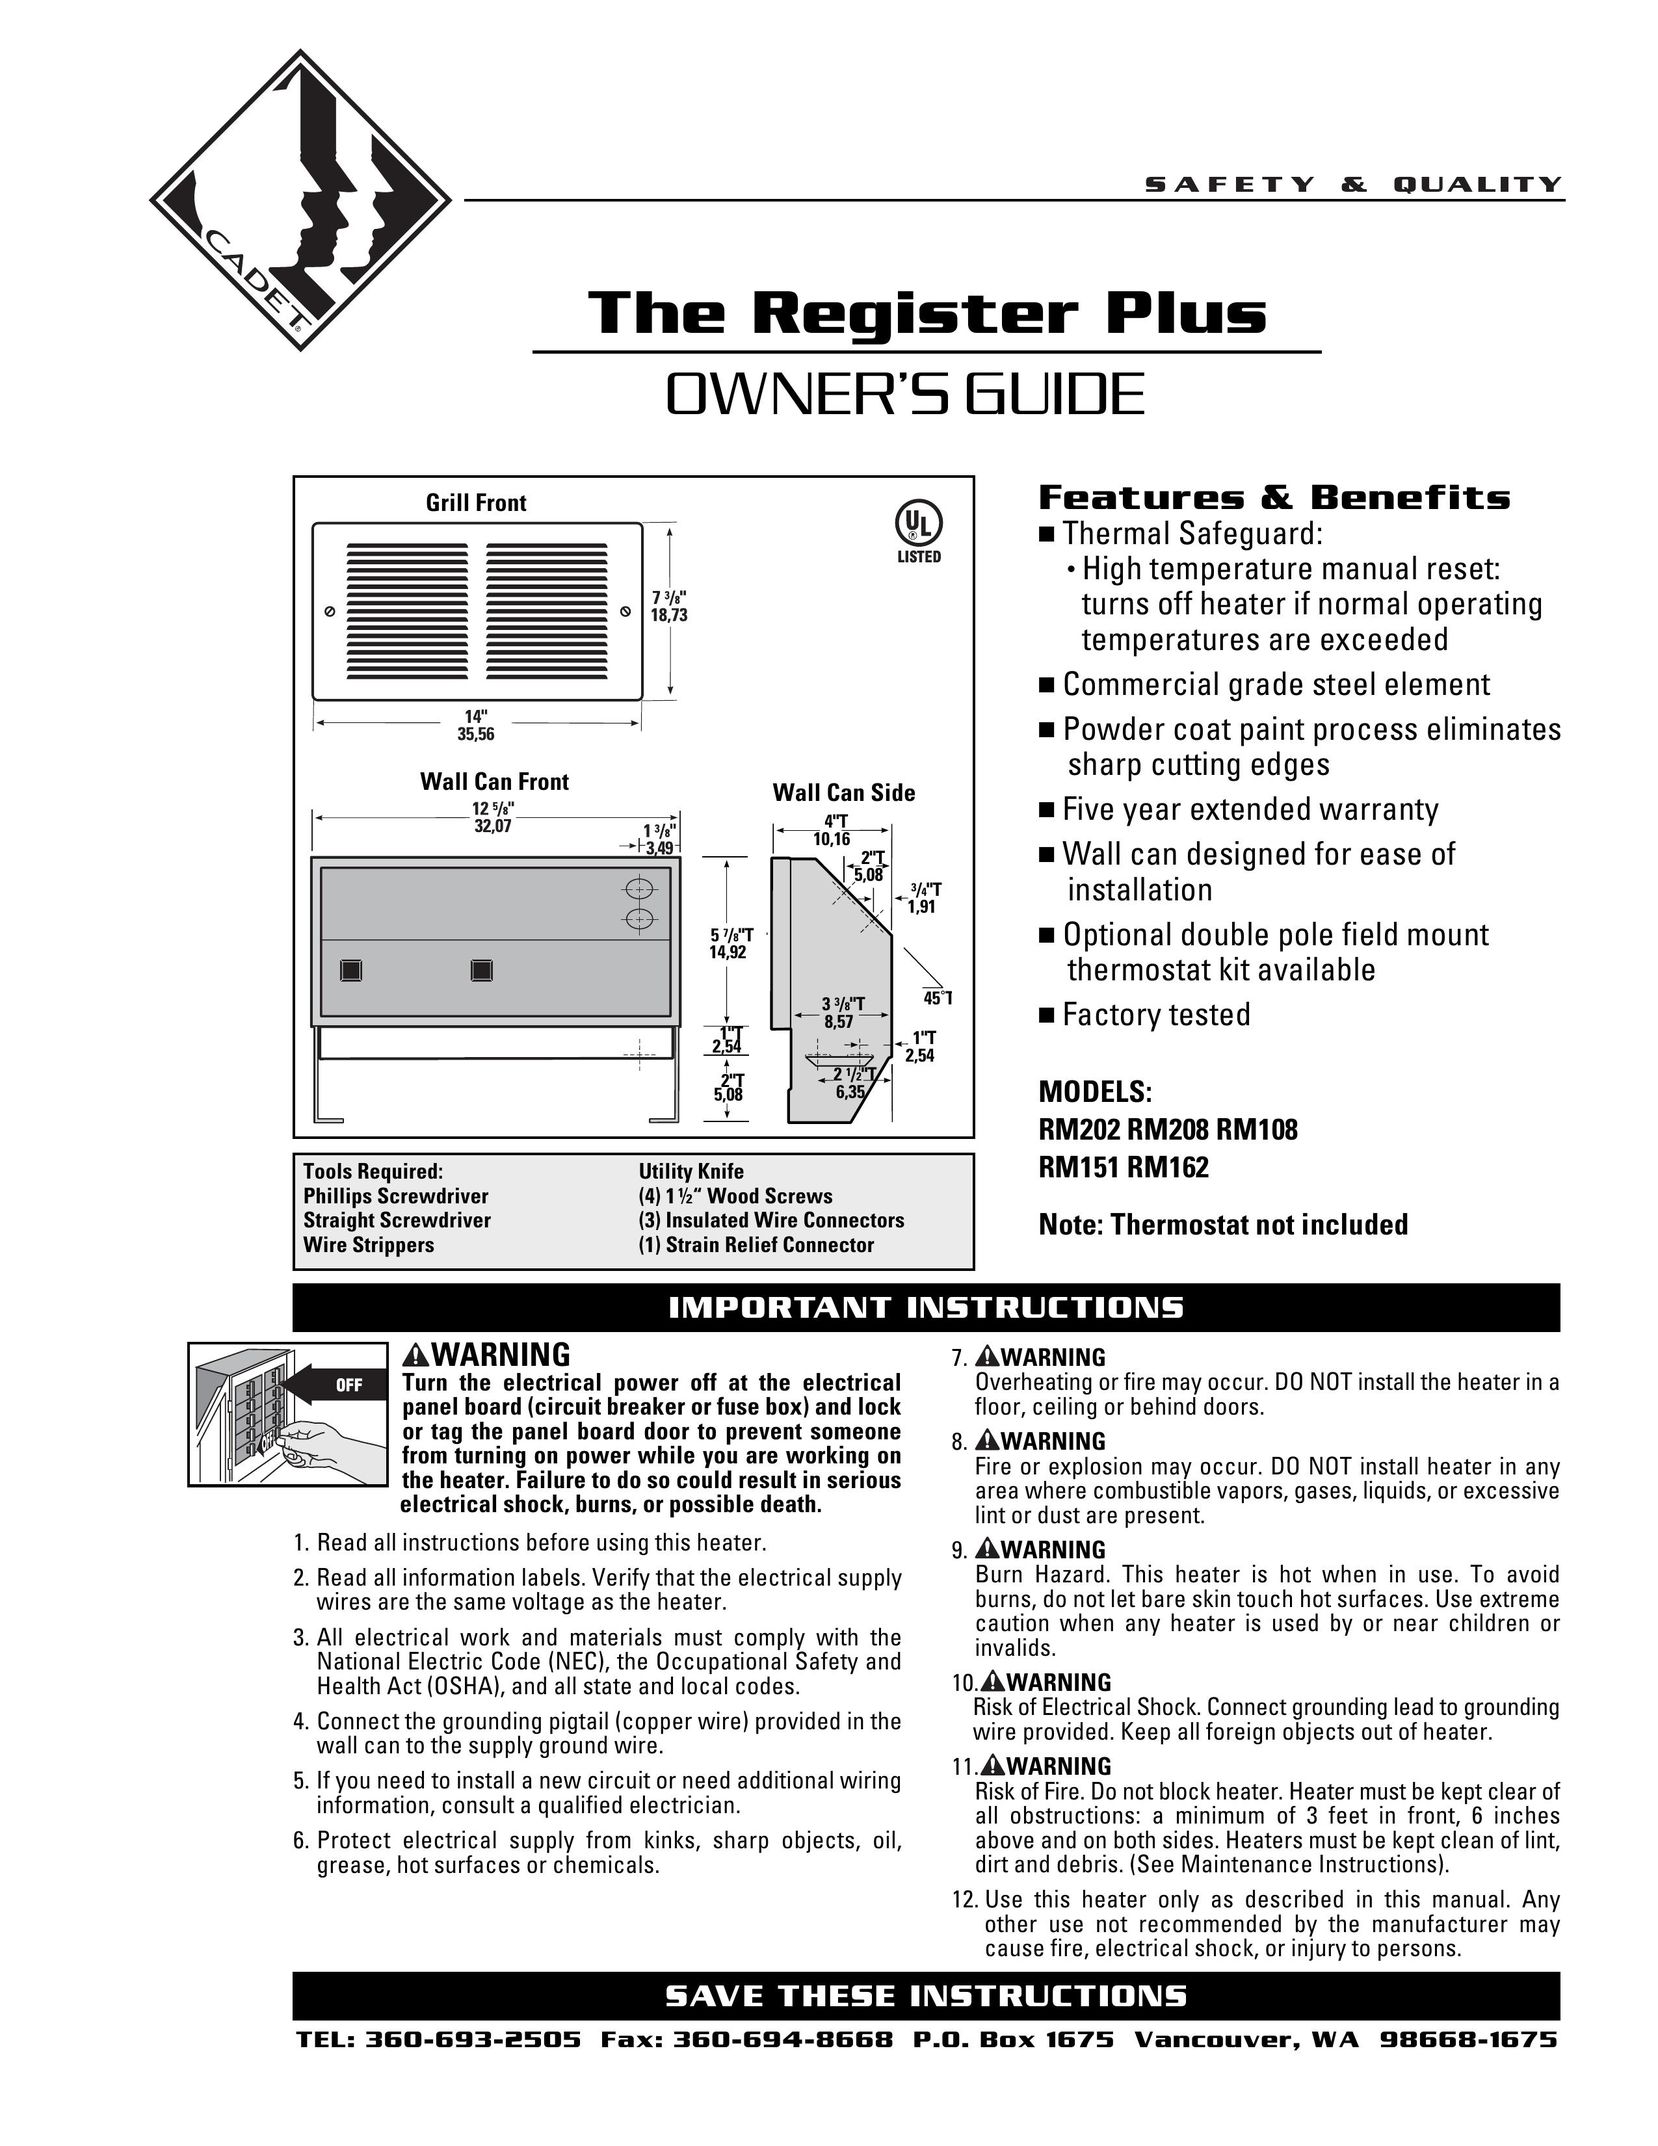 Cadet RM108 Electric Heater User Manual